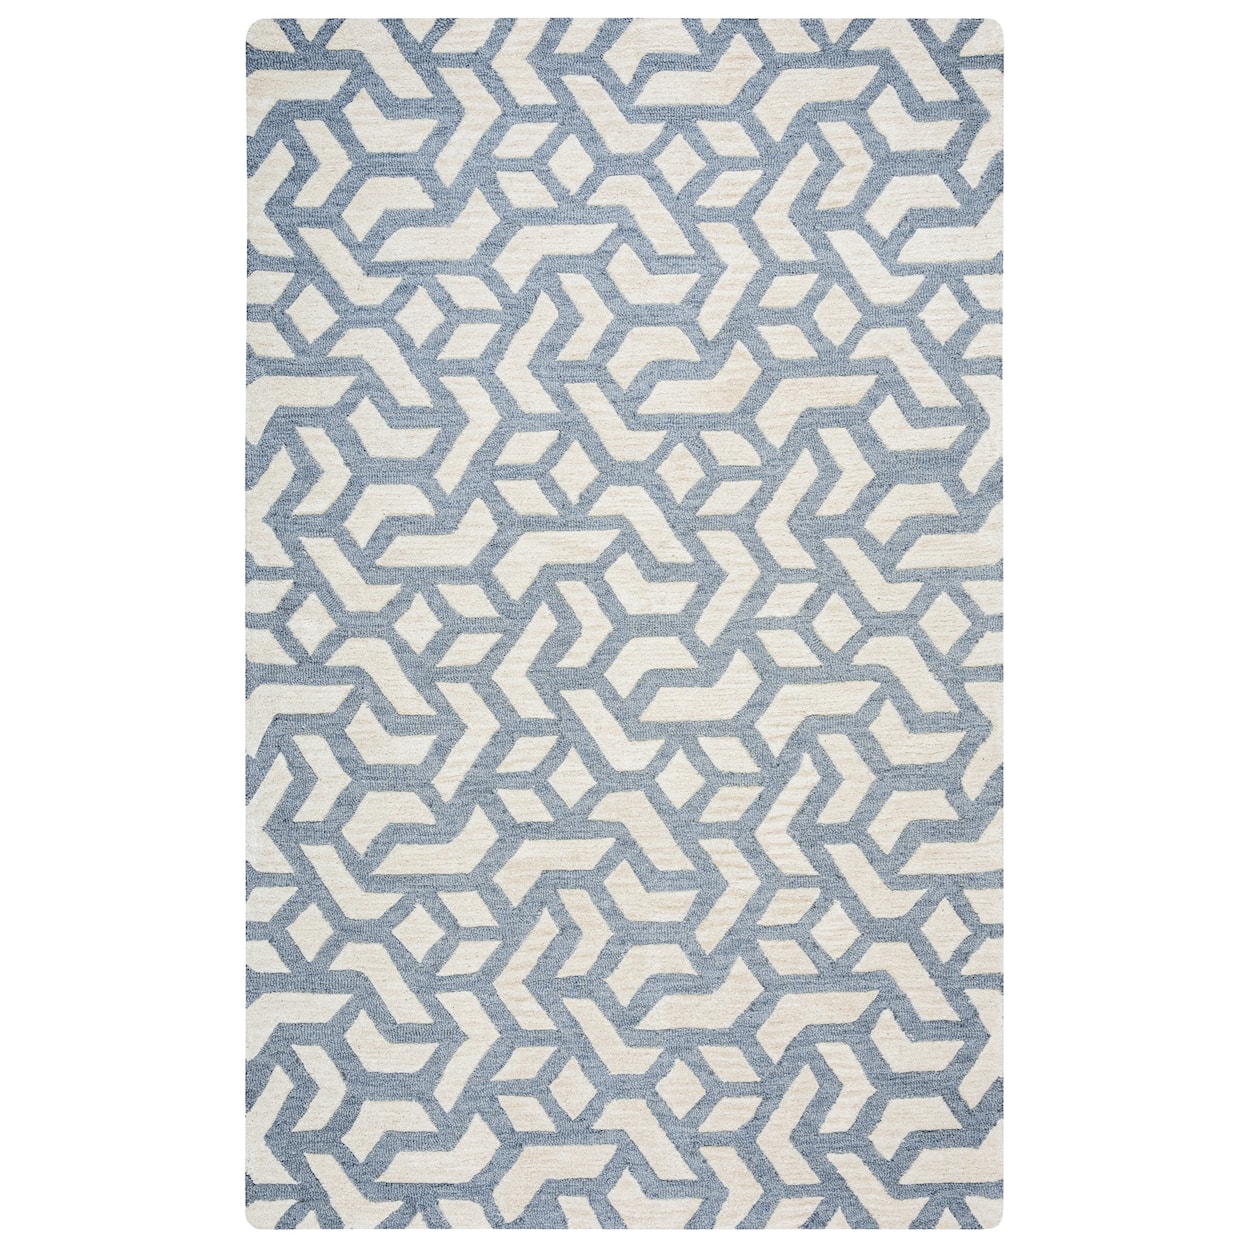 Rizzy Home Caterine 5' x 8' Rectangle Rug